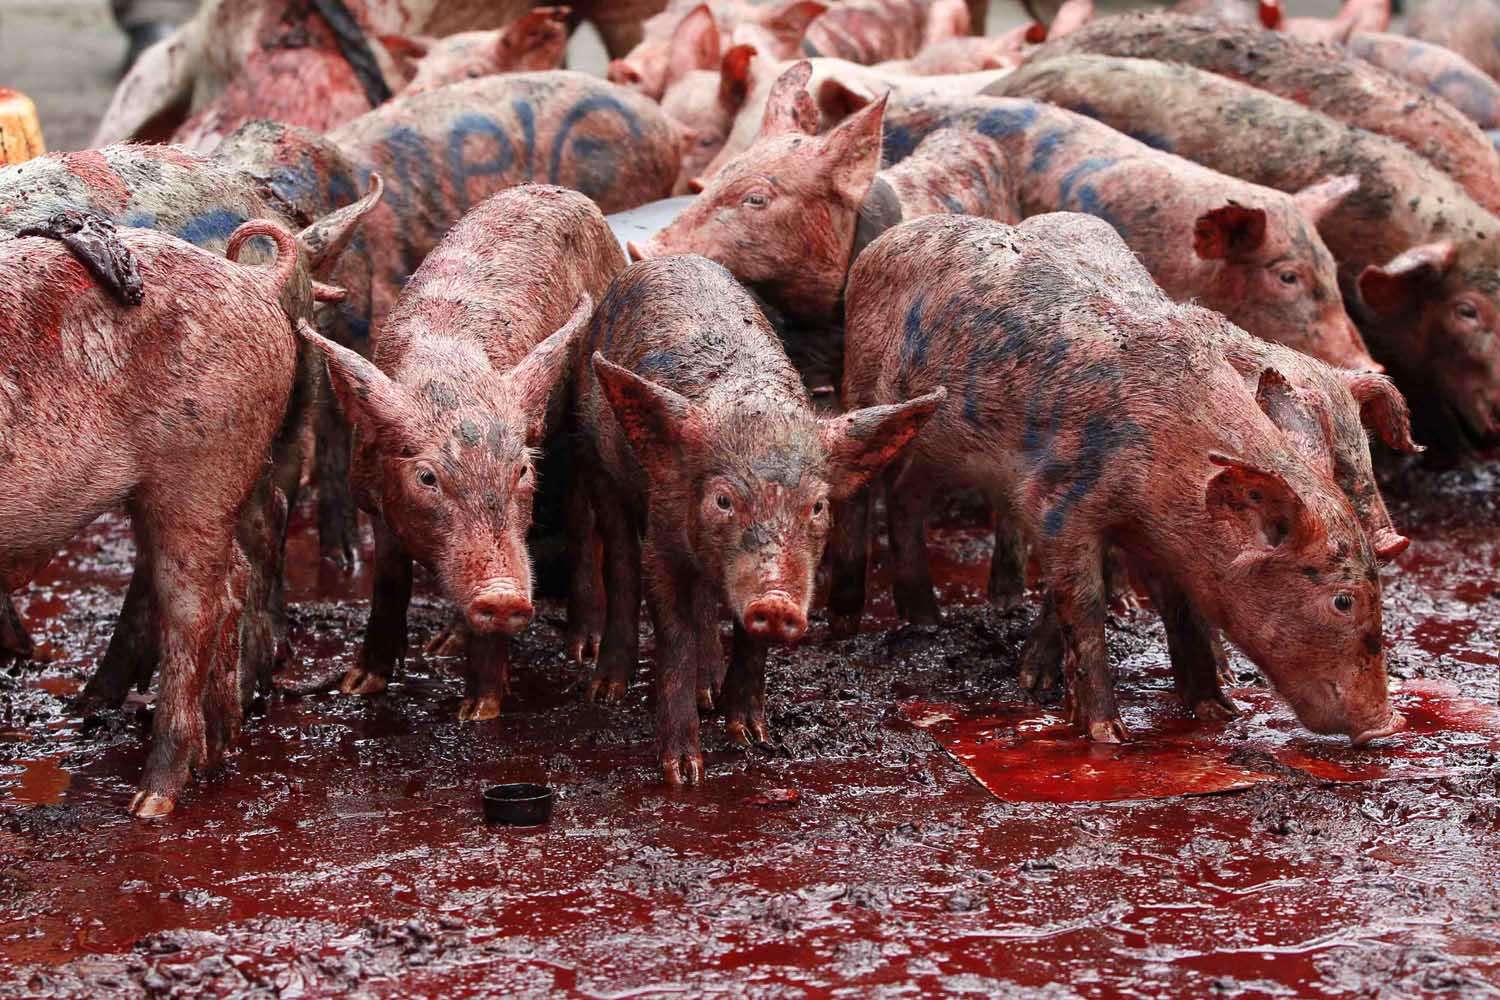 Piglets and pig's blood are seen during a demonstration against lawmakers' salary demands outside parliament buildings in the capital Nairobi